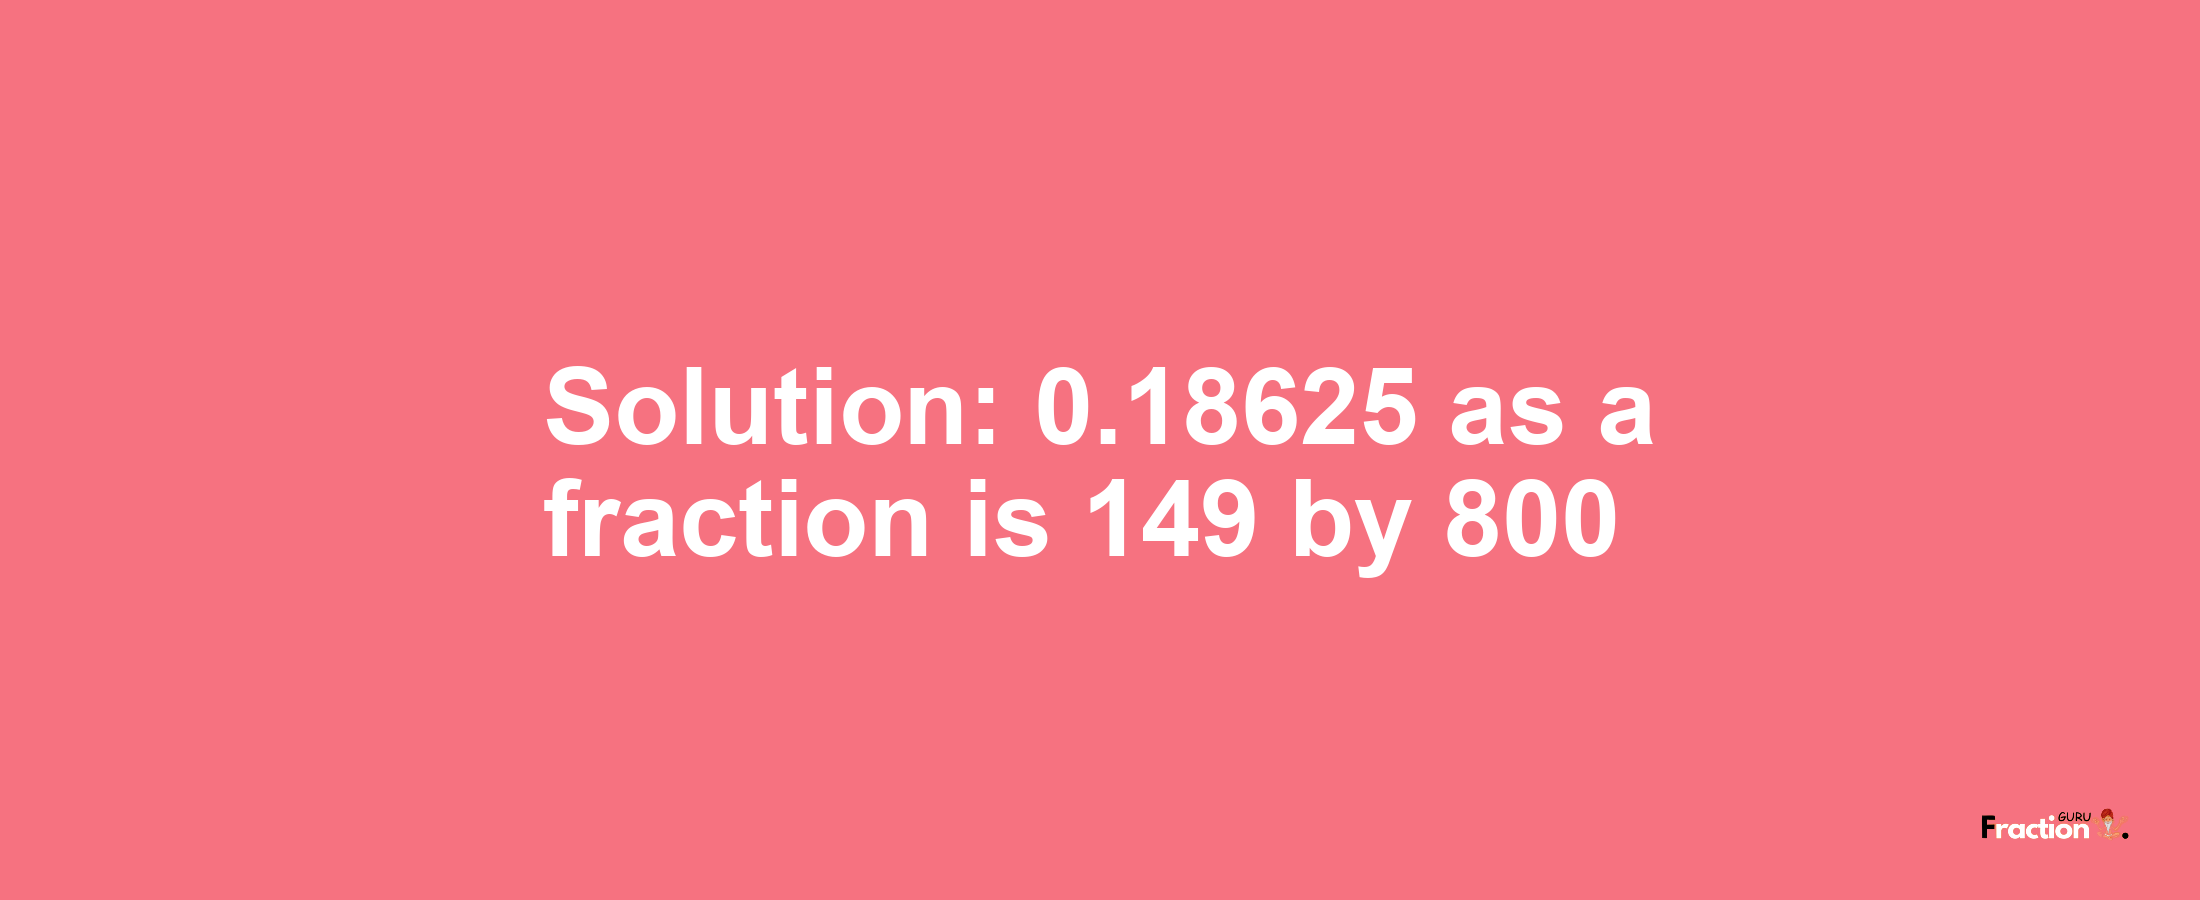 Solution:0.18625 as a fraction is 149/800